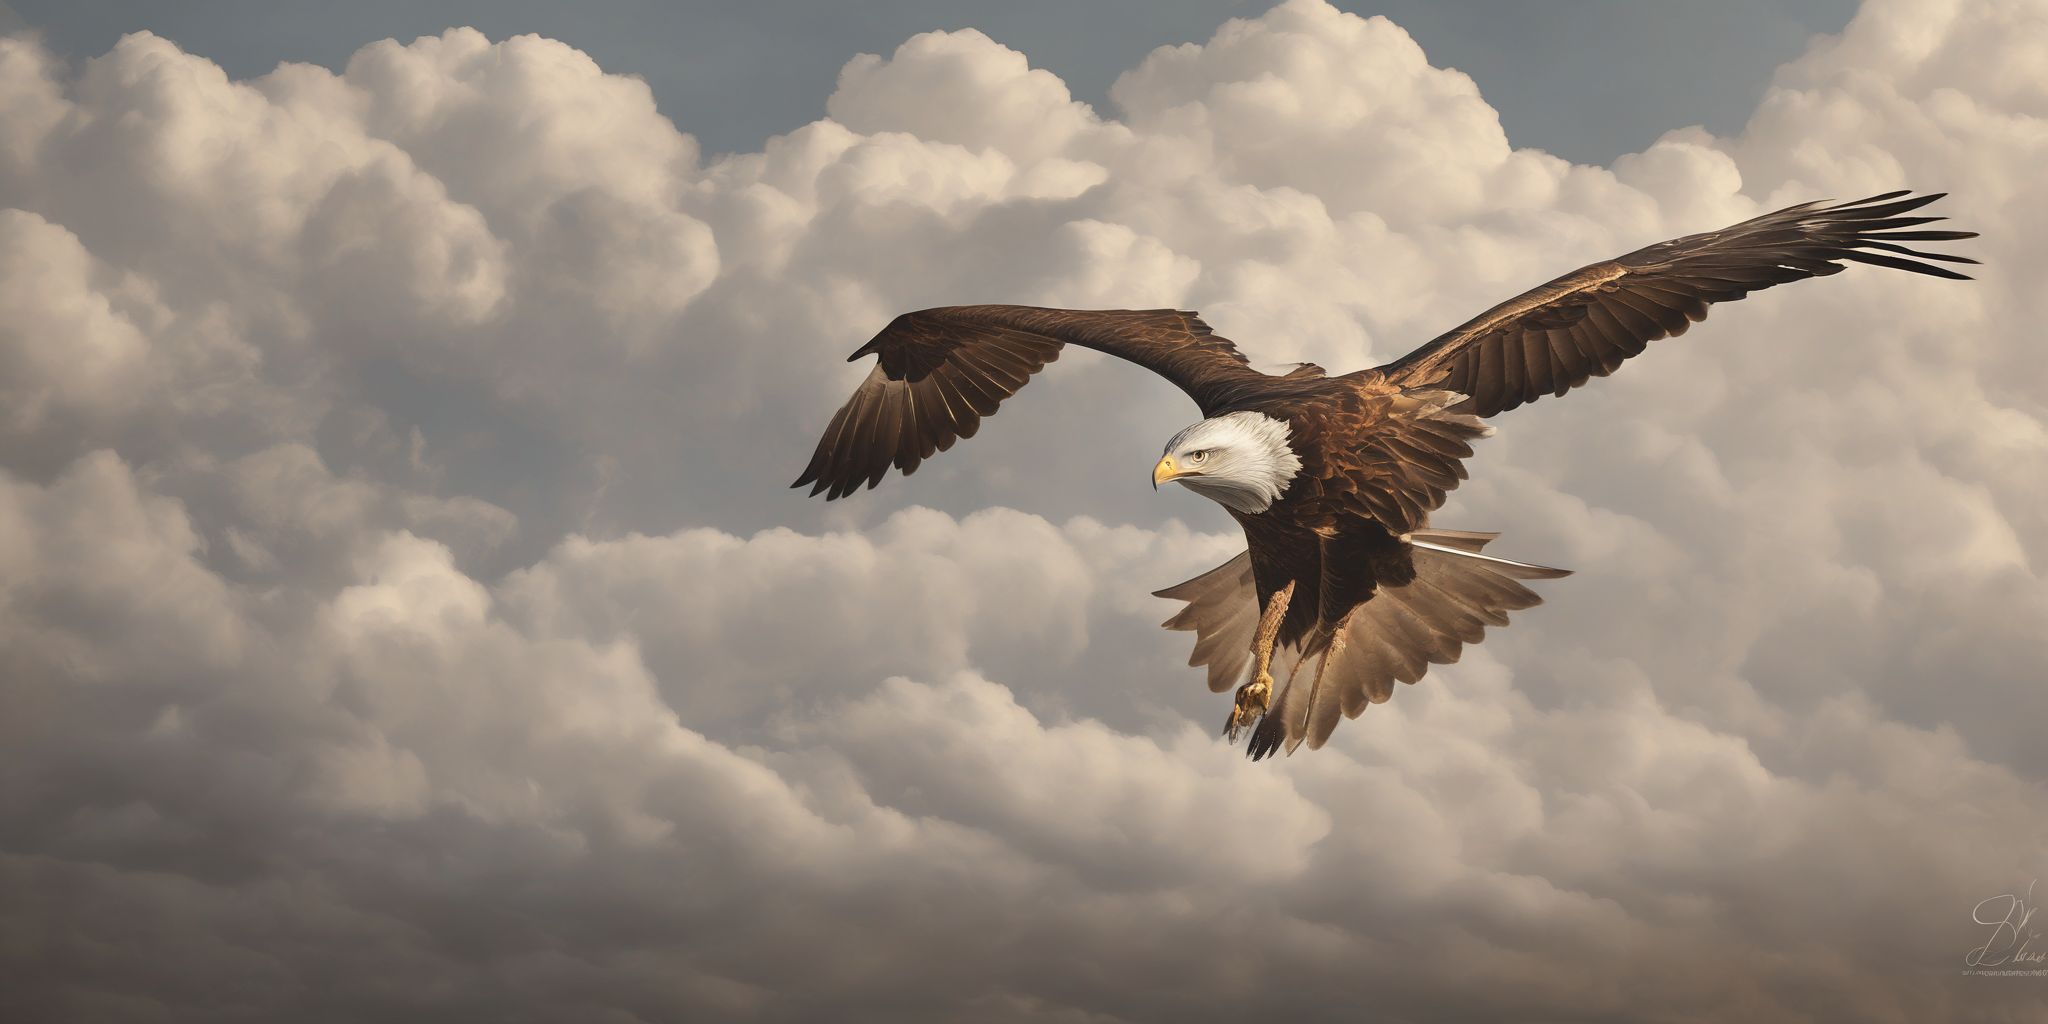 Soaring  in realistic, photographic style